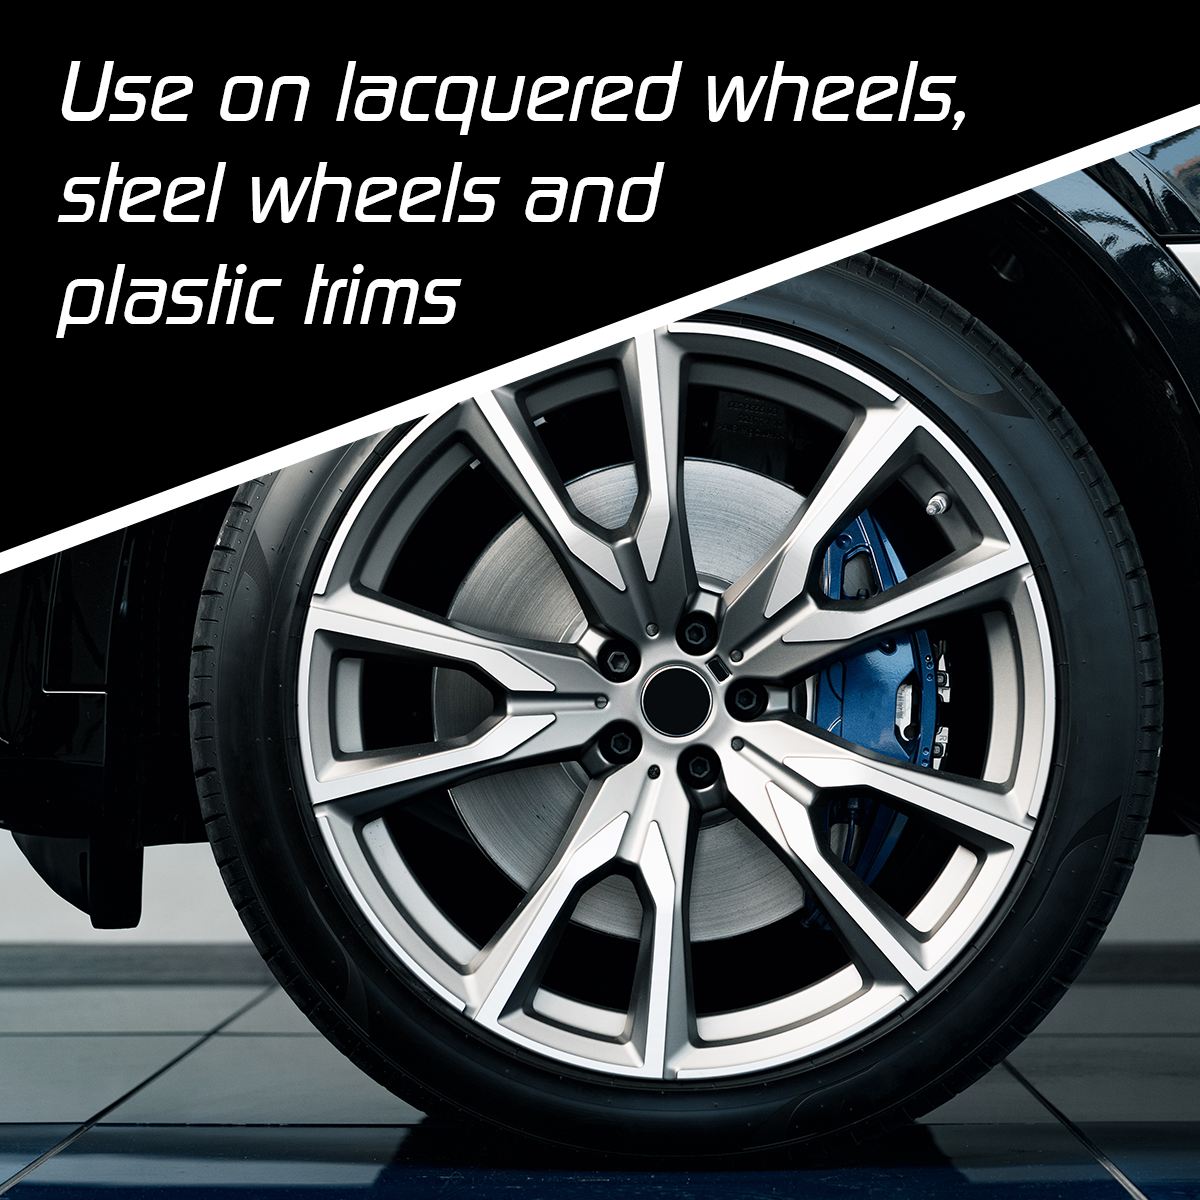 Use on lacquered wheels, steel wheels and plastic trims